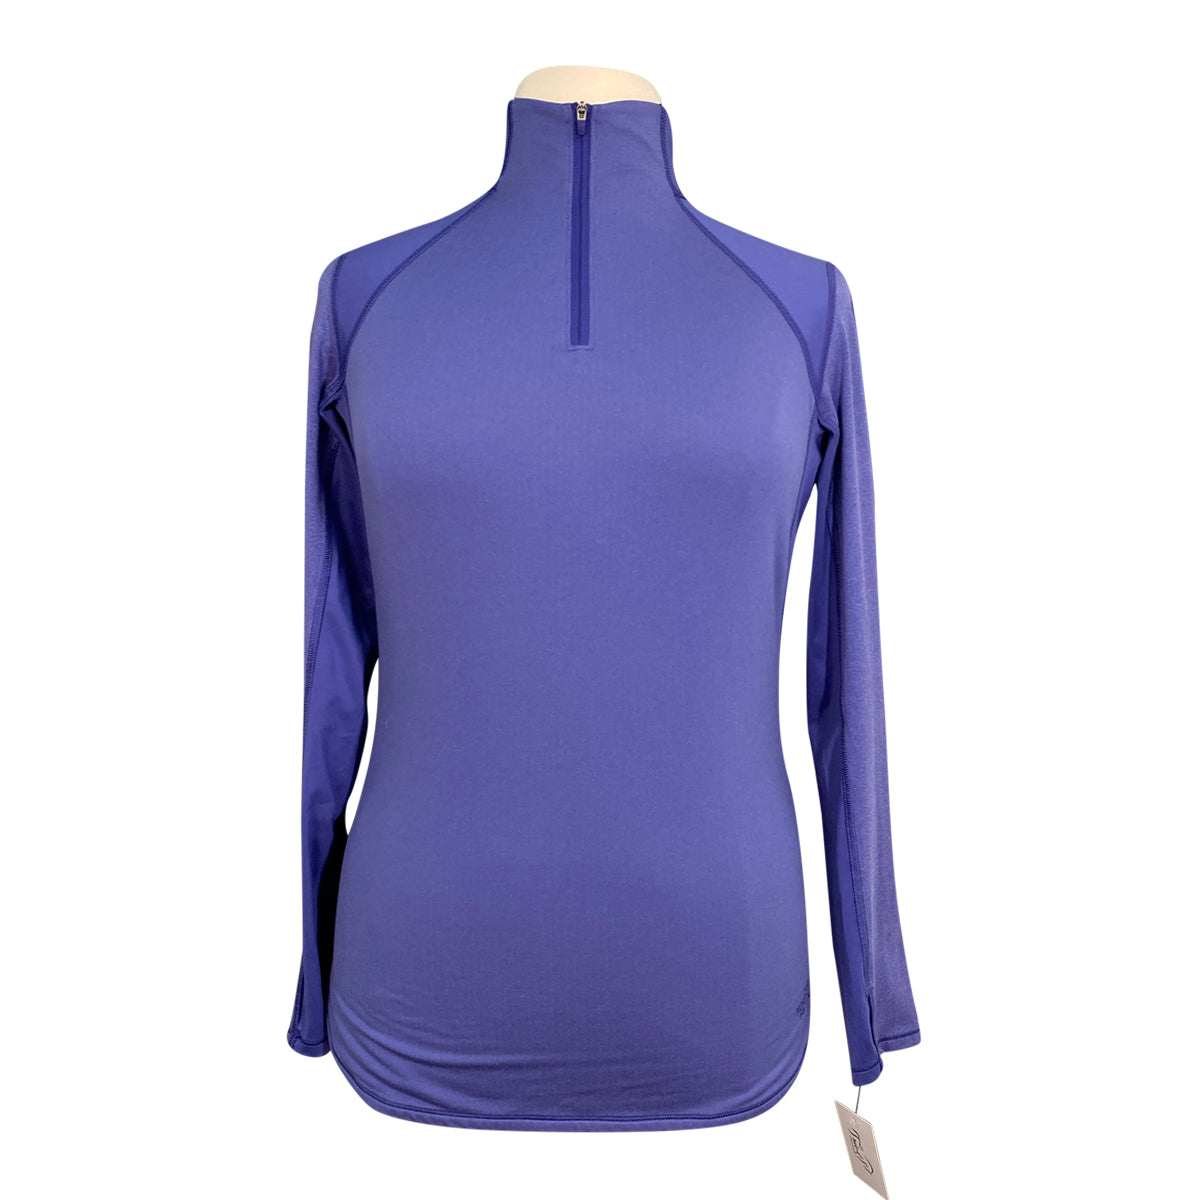 The North Face 1/4 Zip Base Layer in Periwinkle